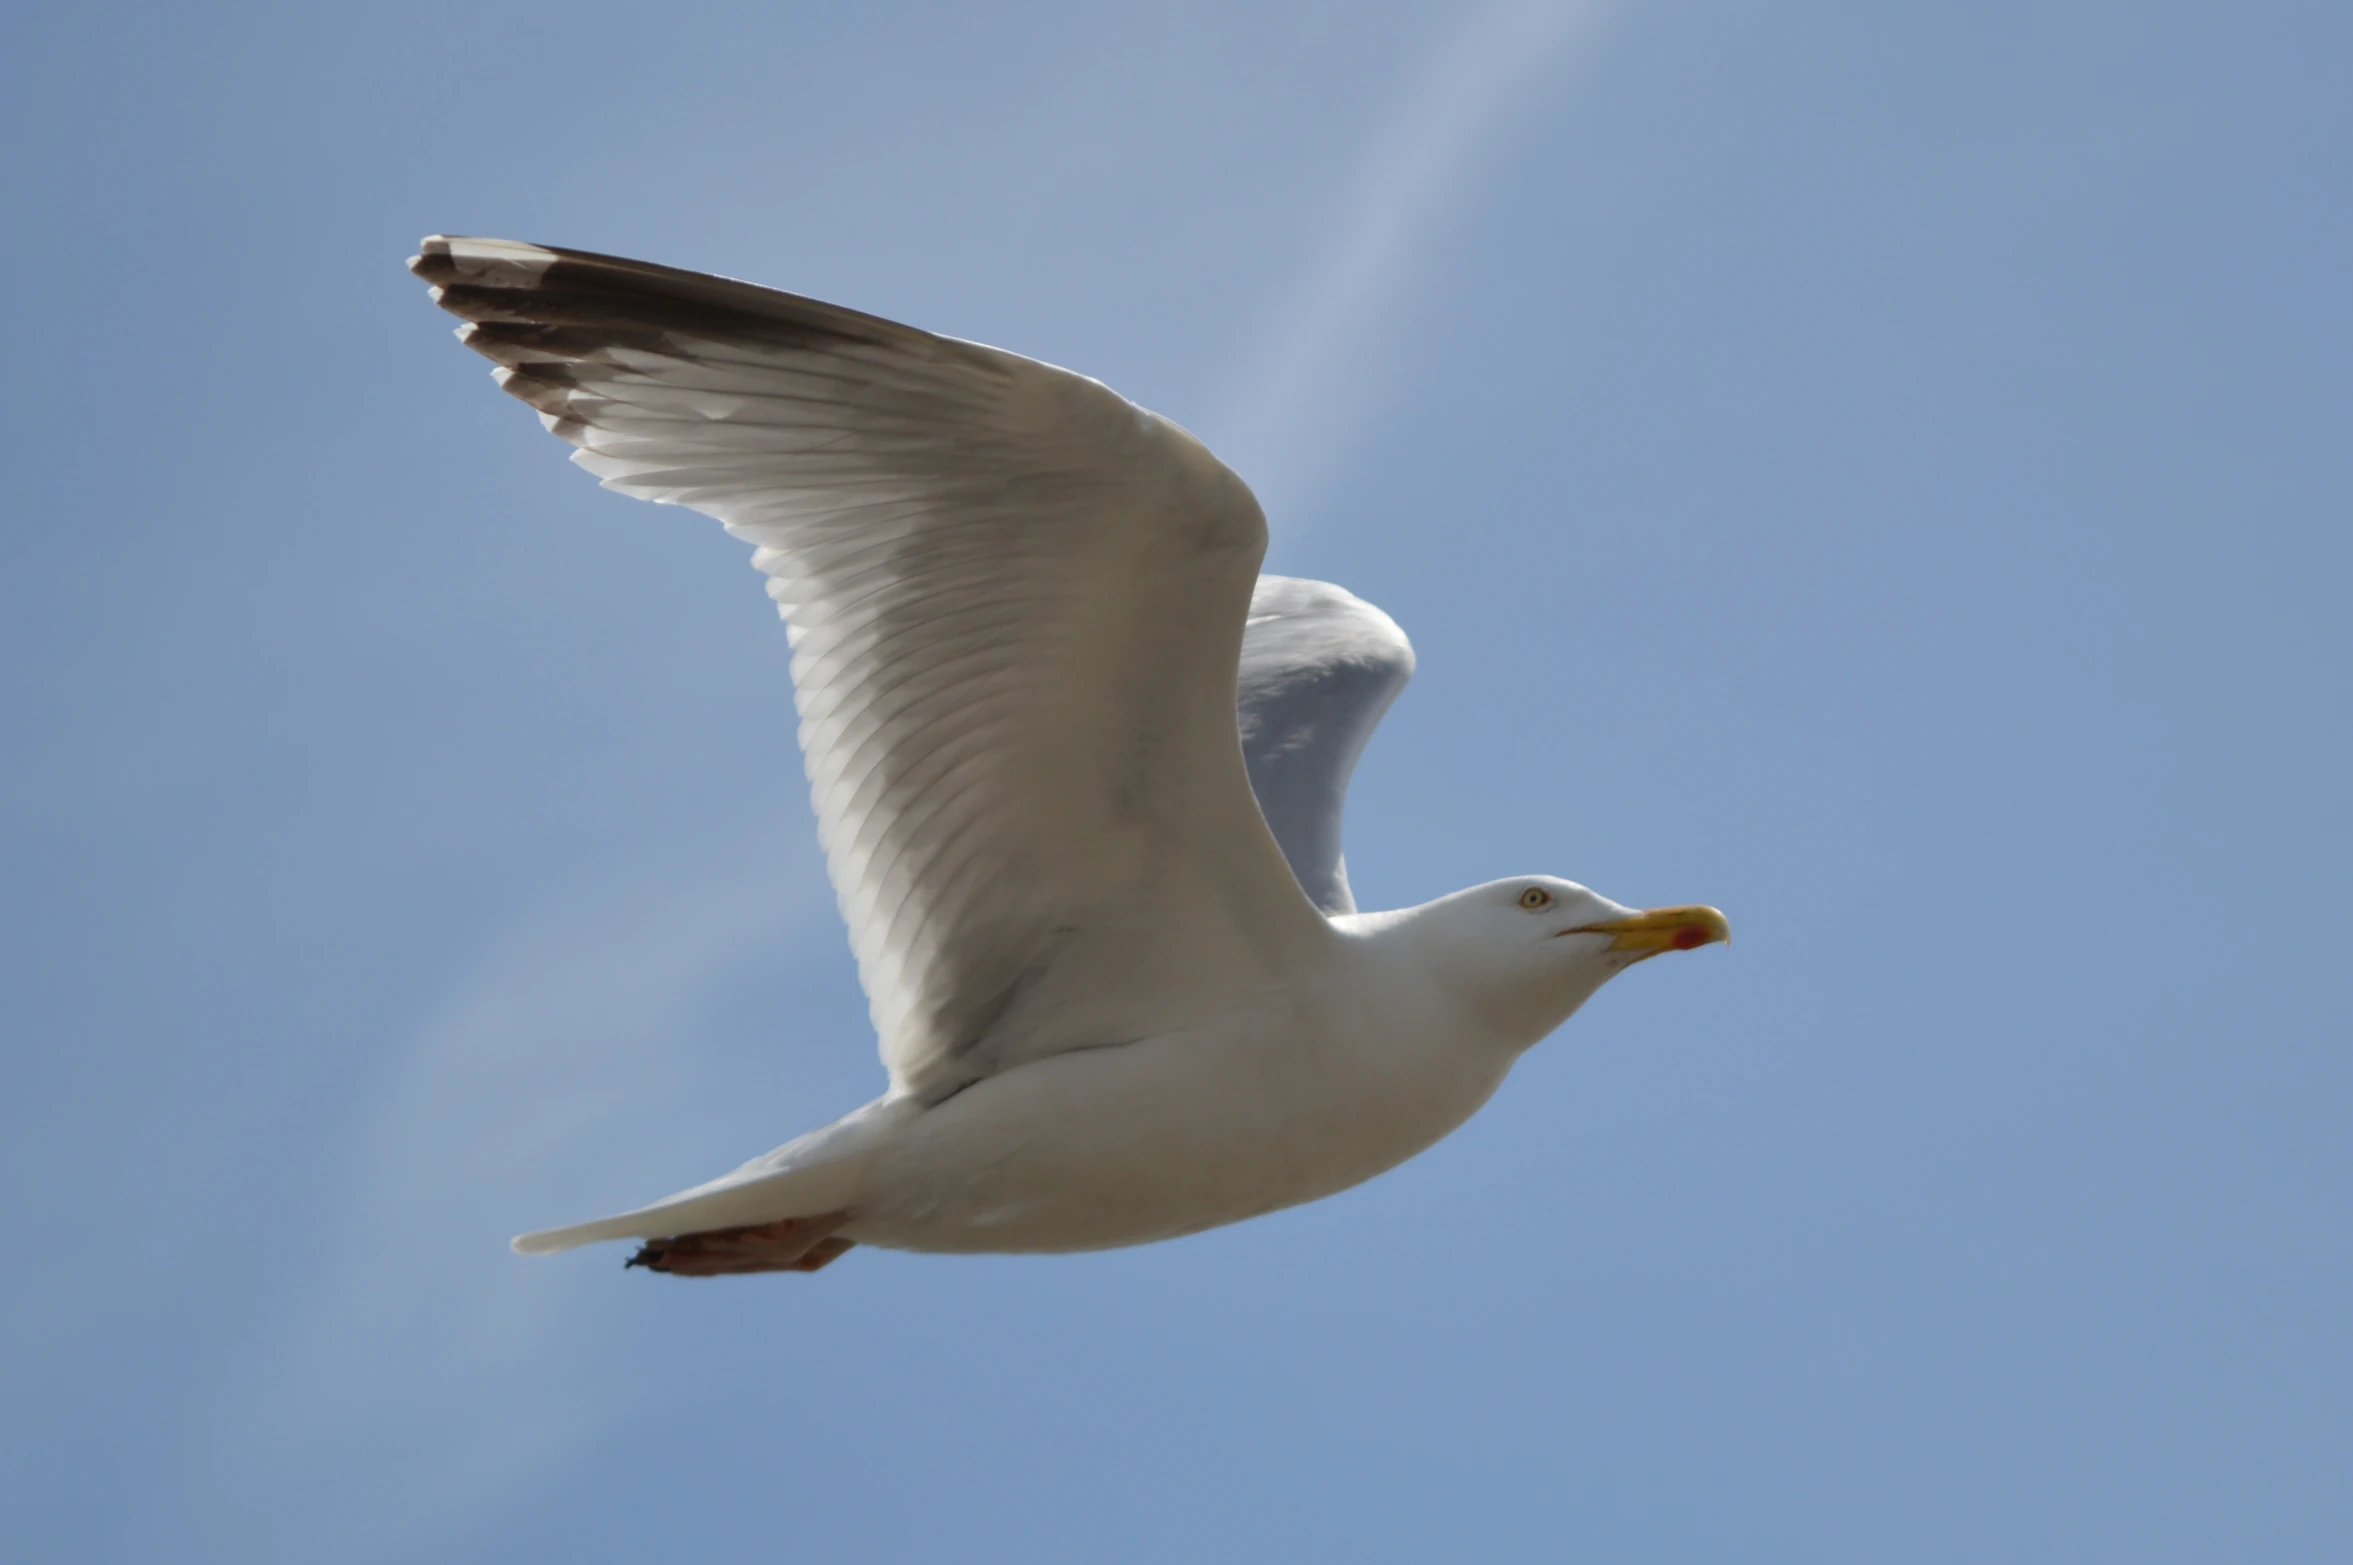 a bird flying with wings extended against a blue sky